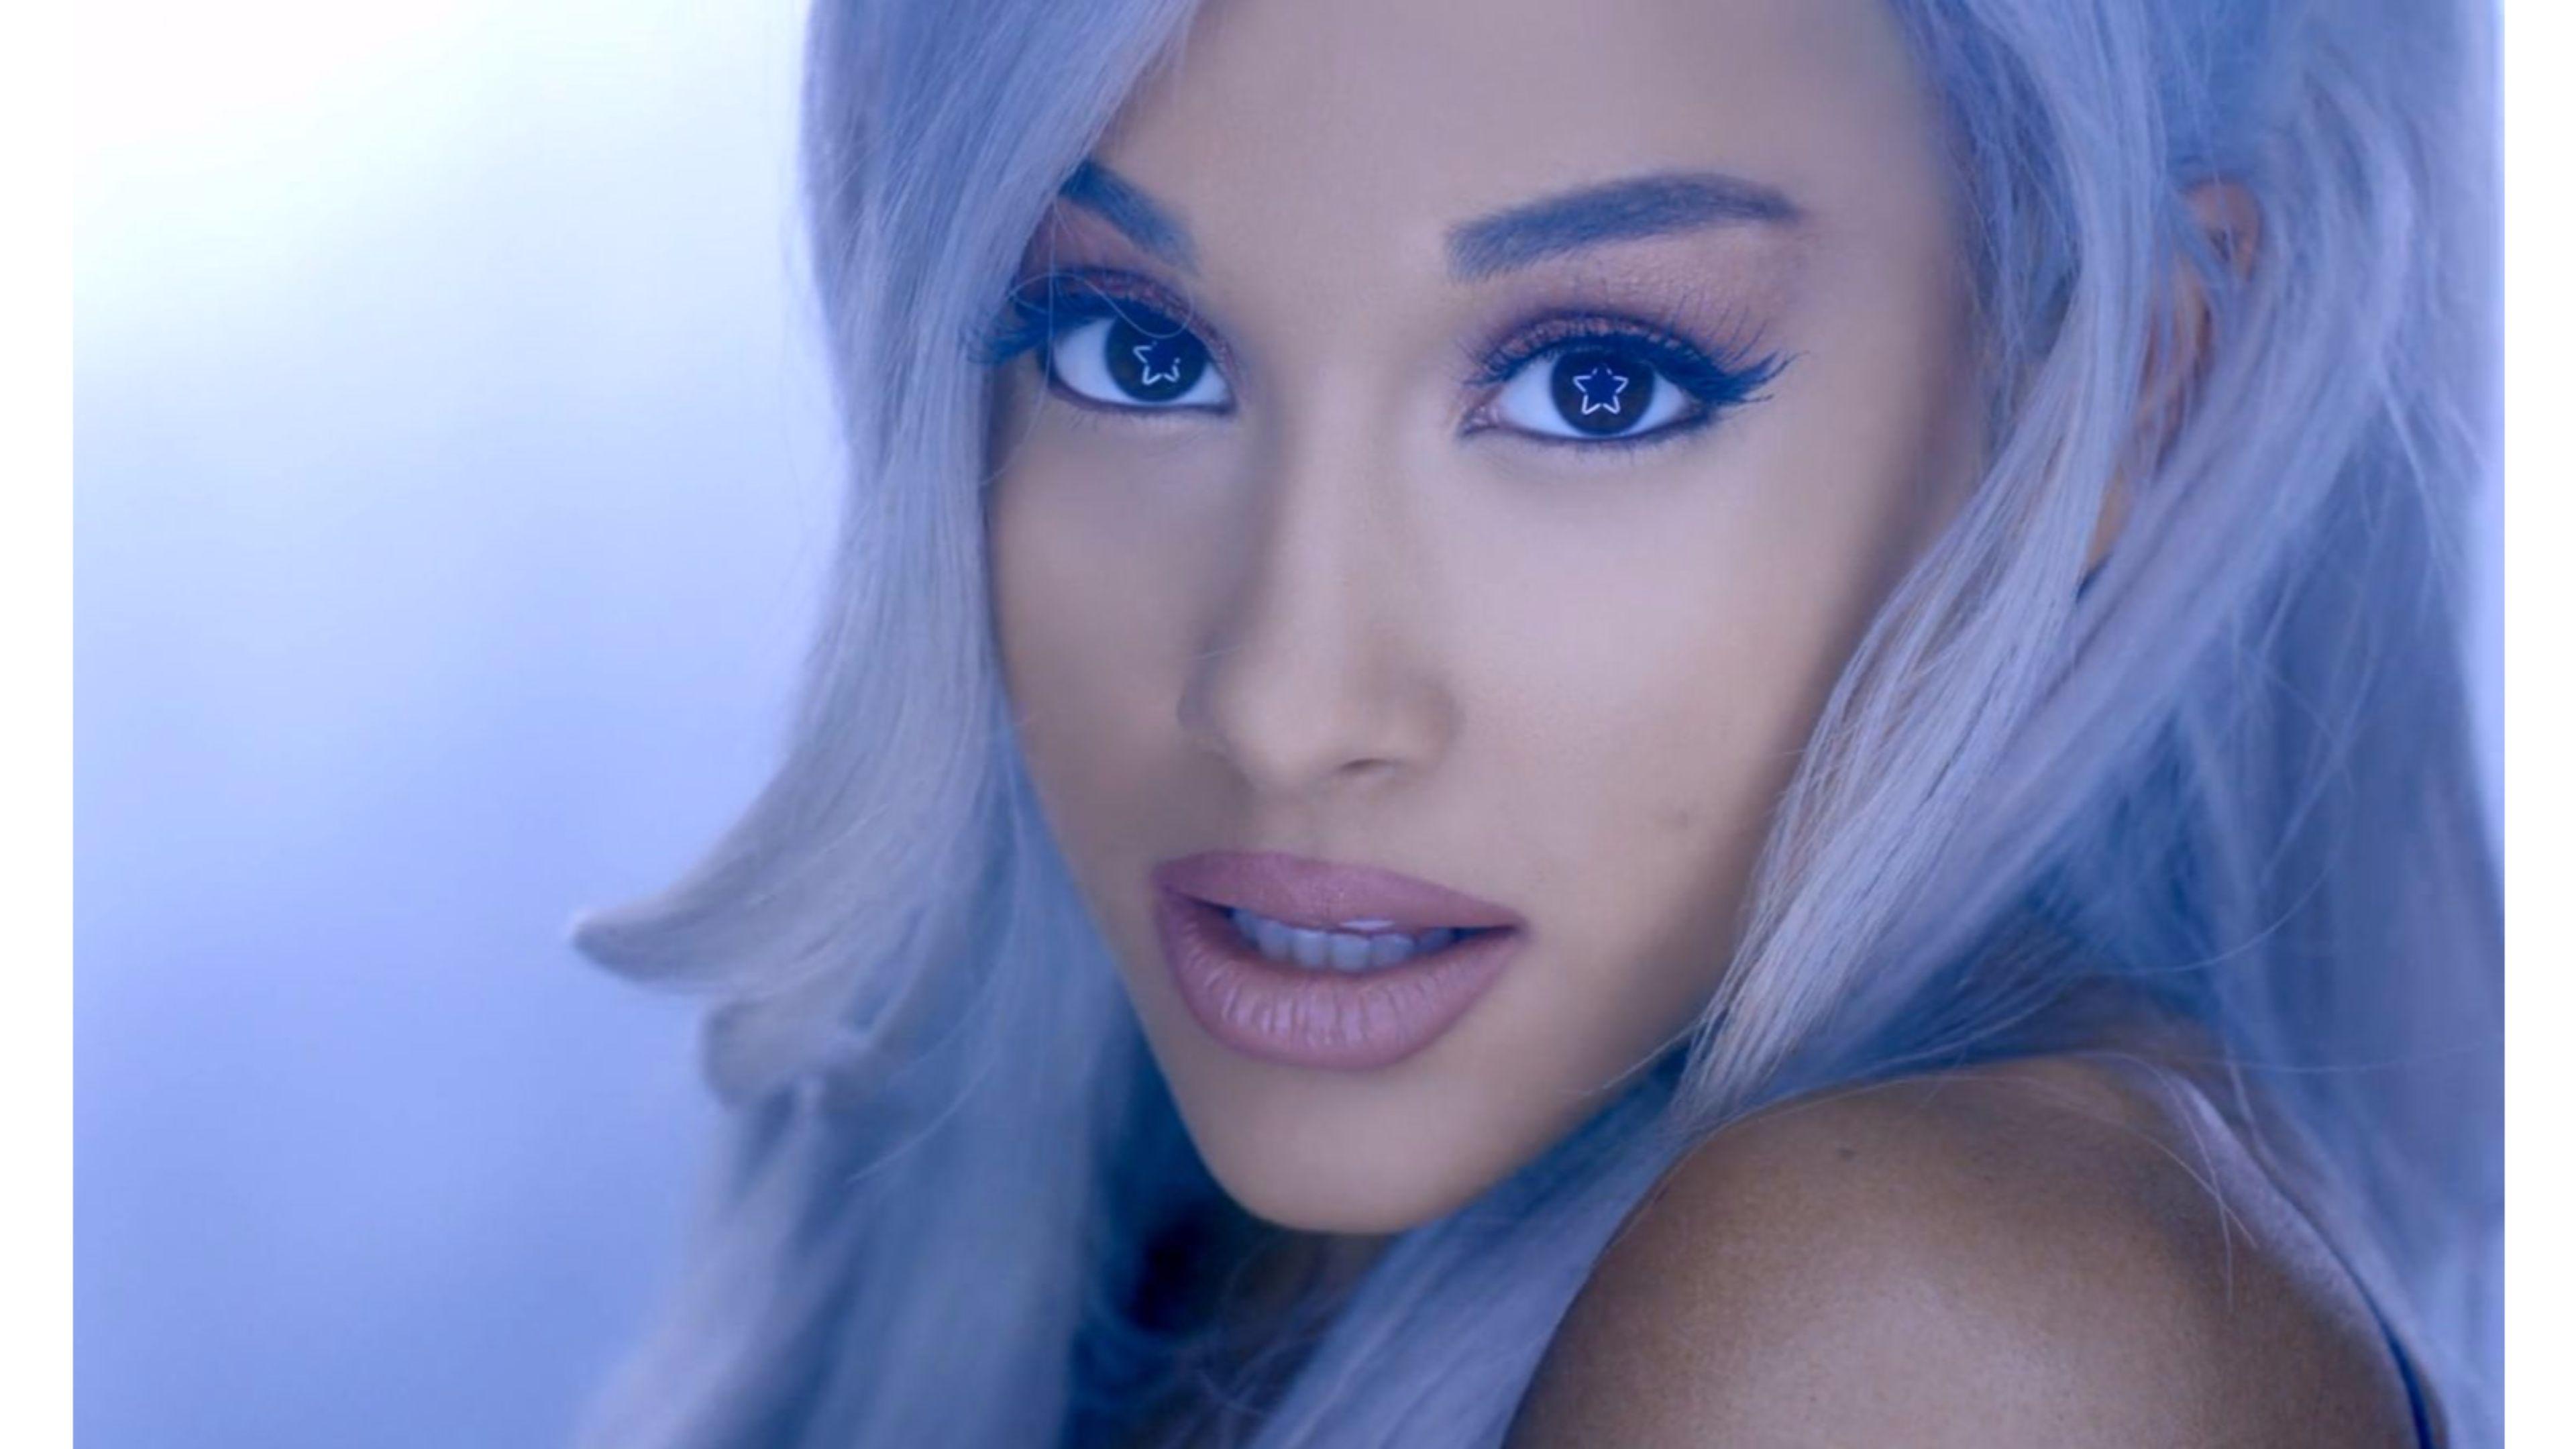 Ariana Grande is Now the Biggest Female Artist on YouTube